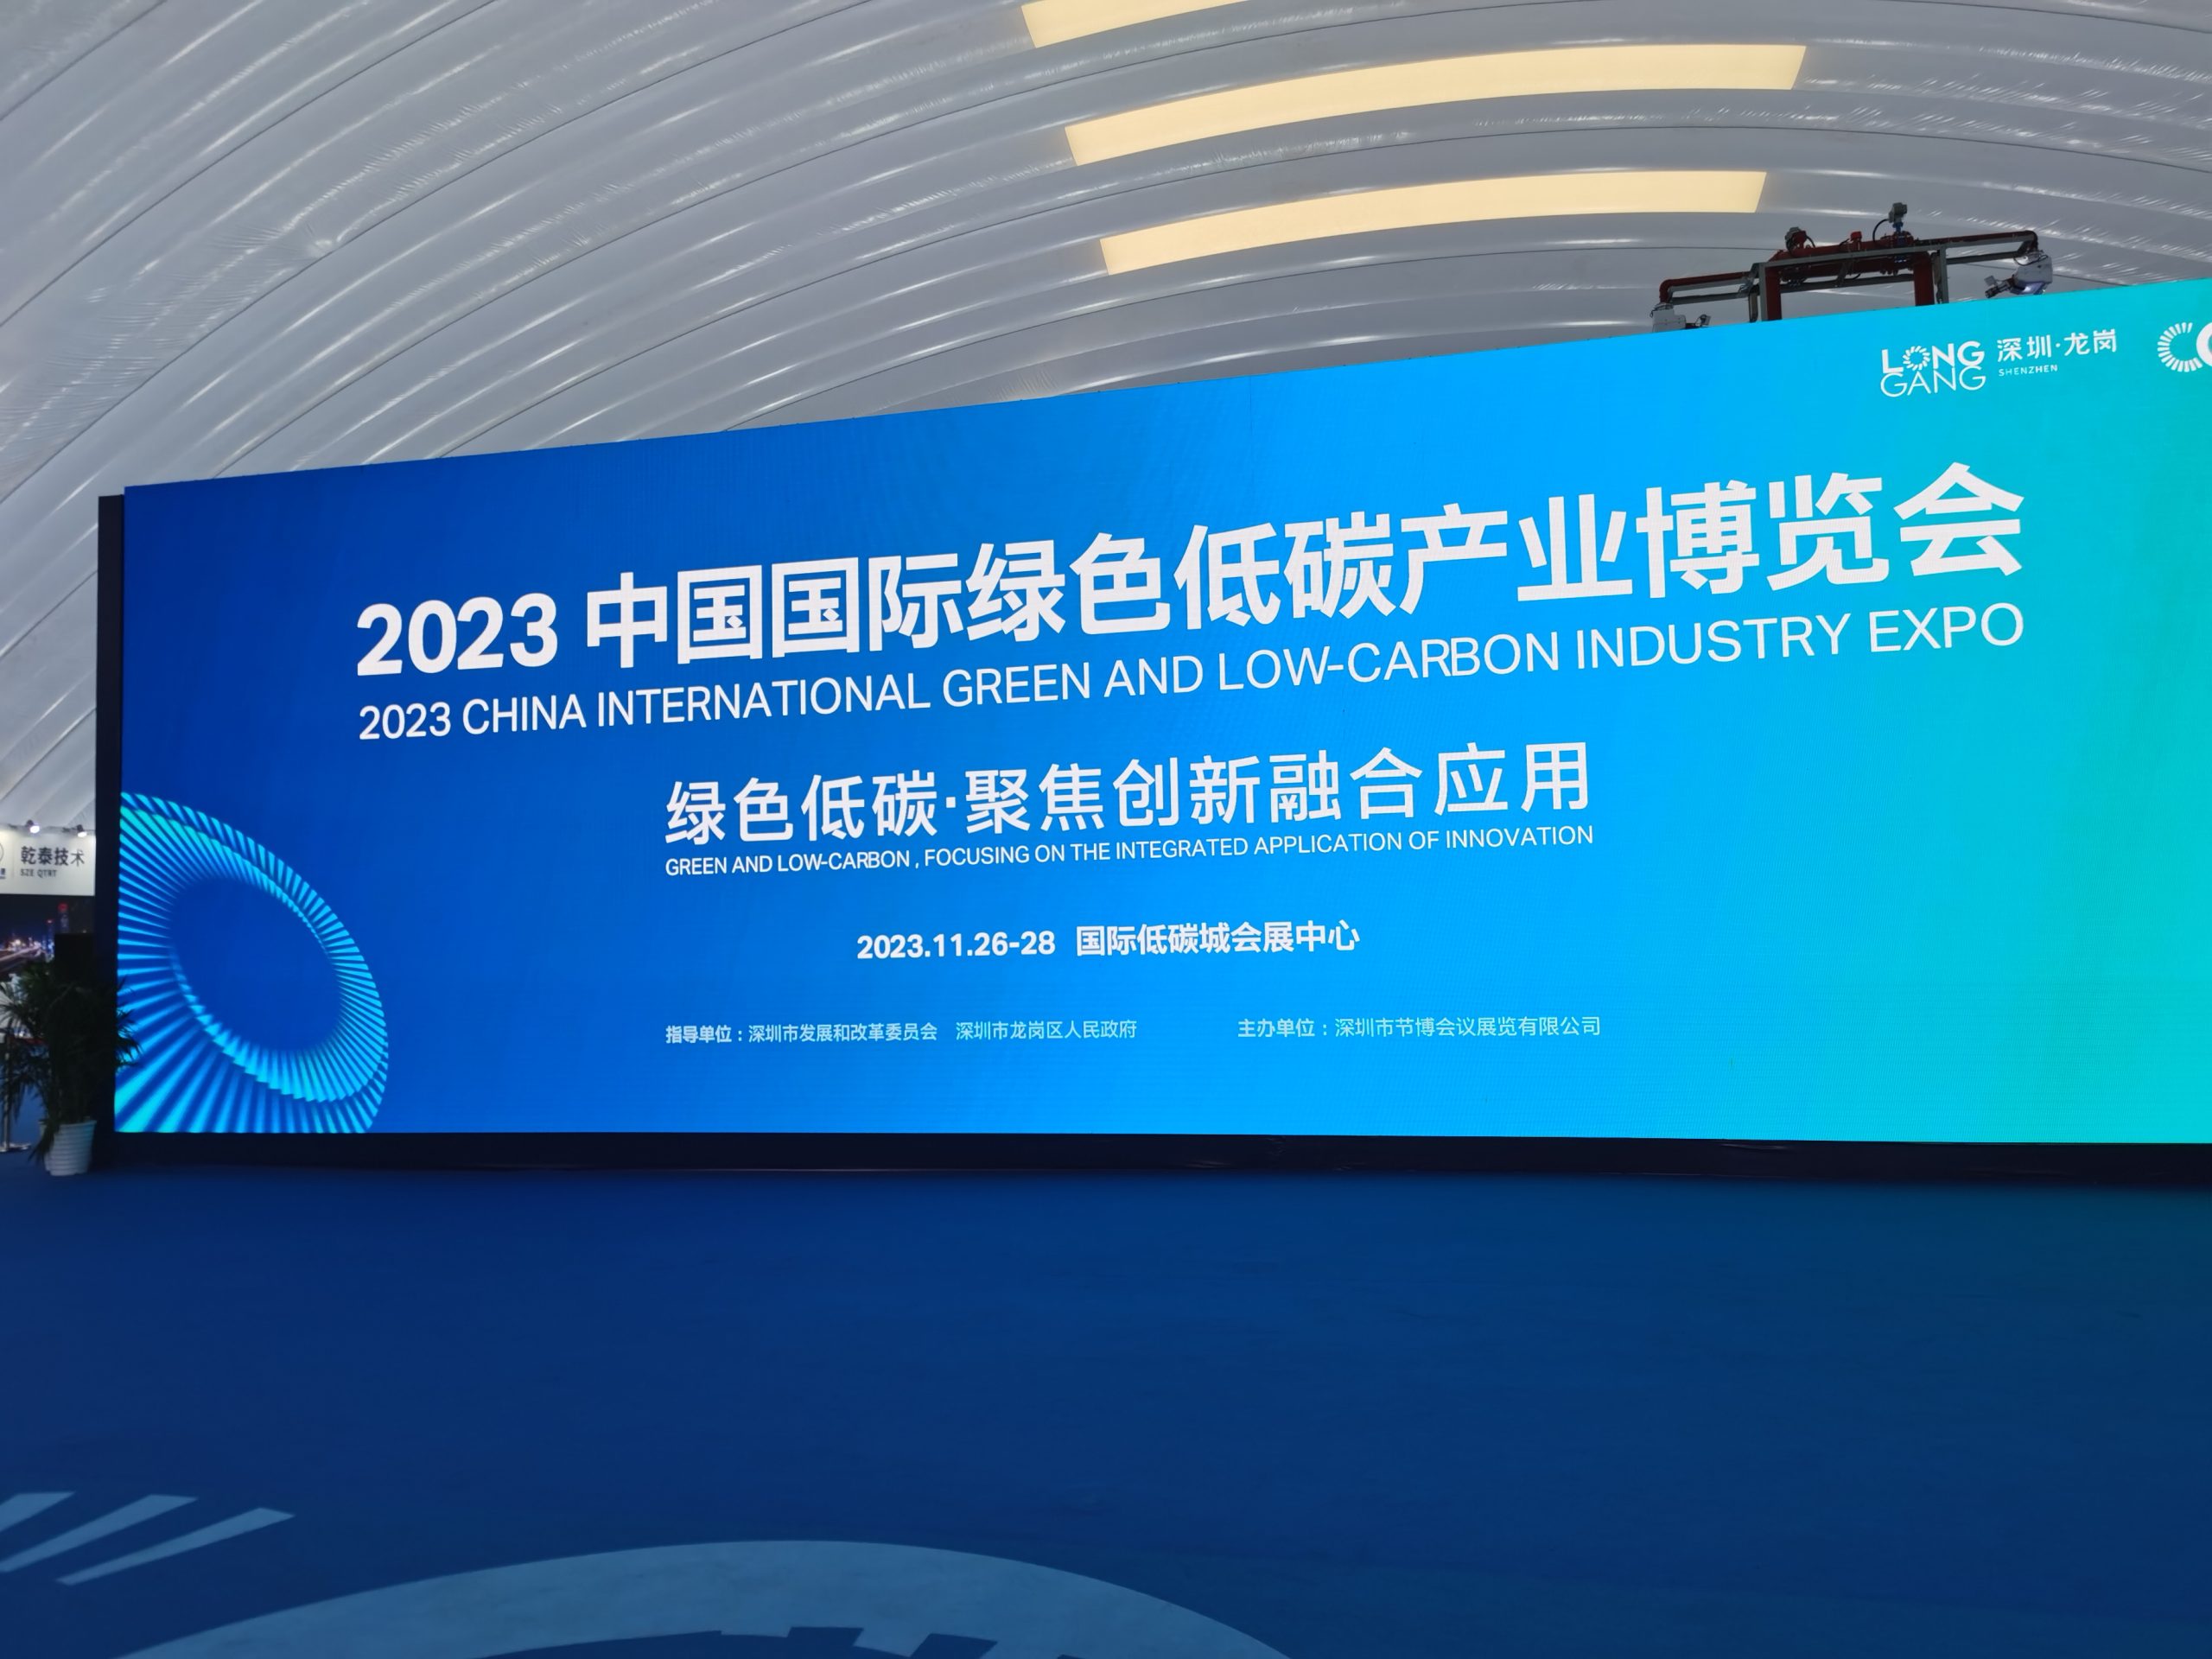 The 2023 China International Green Low-Carbon Industry Expo Held in Shenzhen